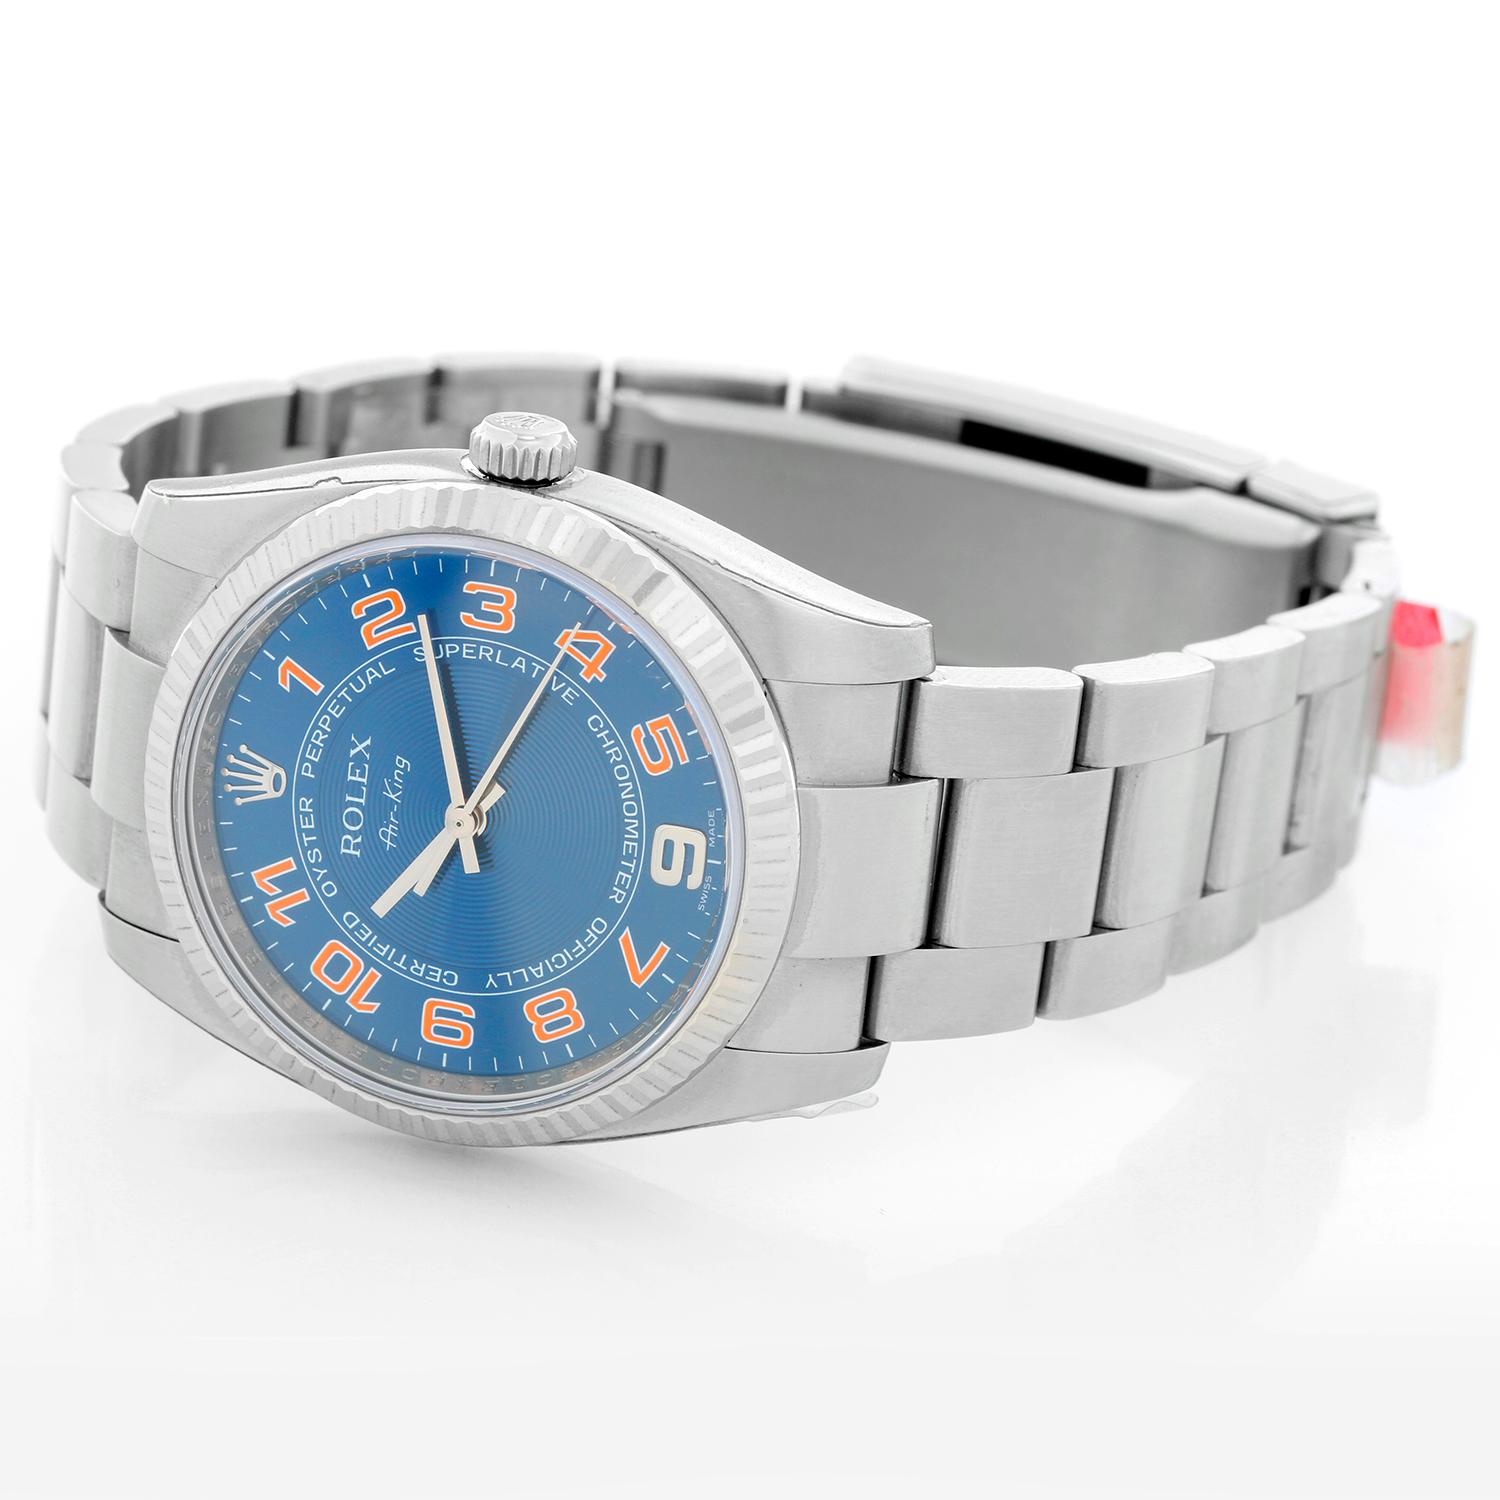 Rolex Air-King Men's Stainless Steel Blue Dial Watch  114234 - Automatic winding, 31 jewels, no-date, sapphire crystal. Stainless steel case with 18k white gold bezel (33mm diameter). Blue concentric dial with orange Arabic numerals . Stainless